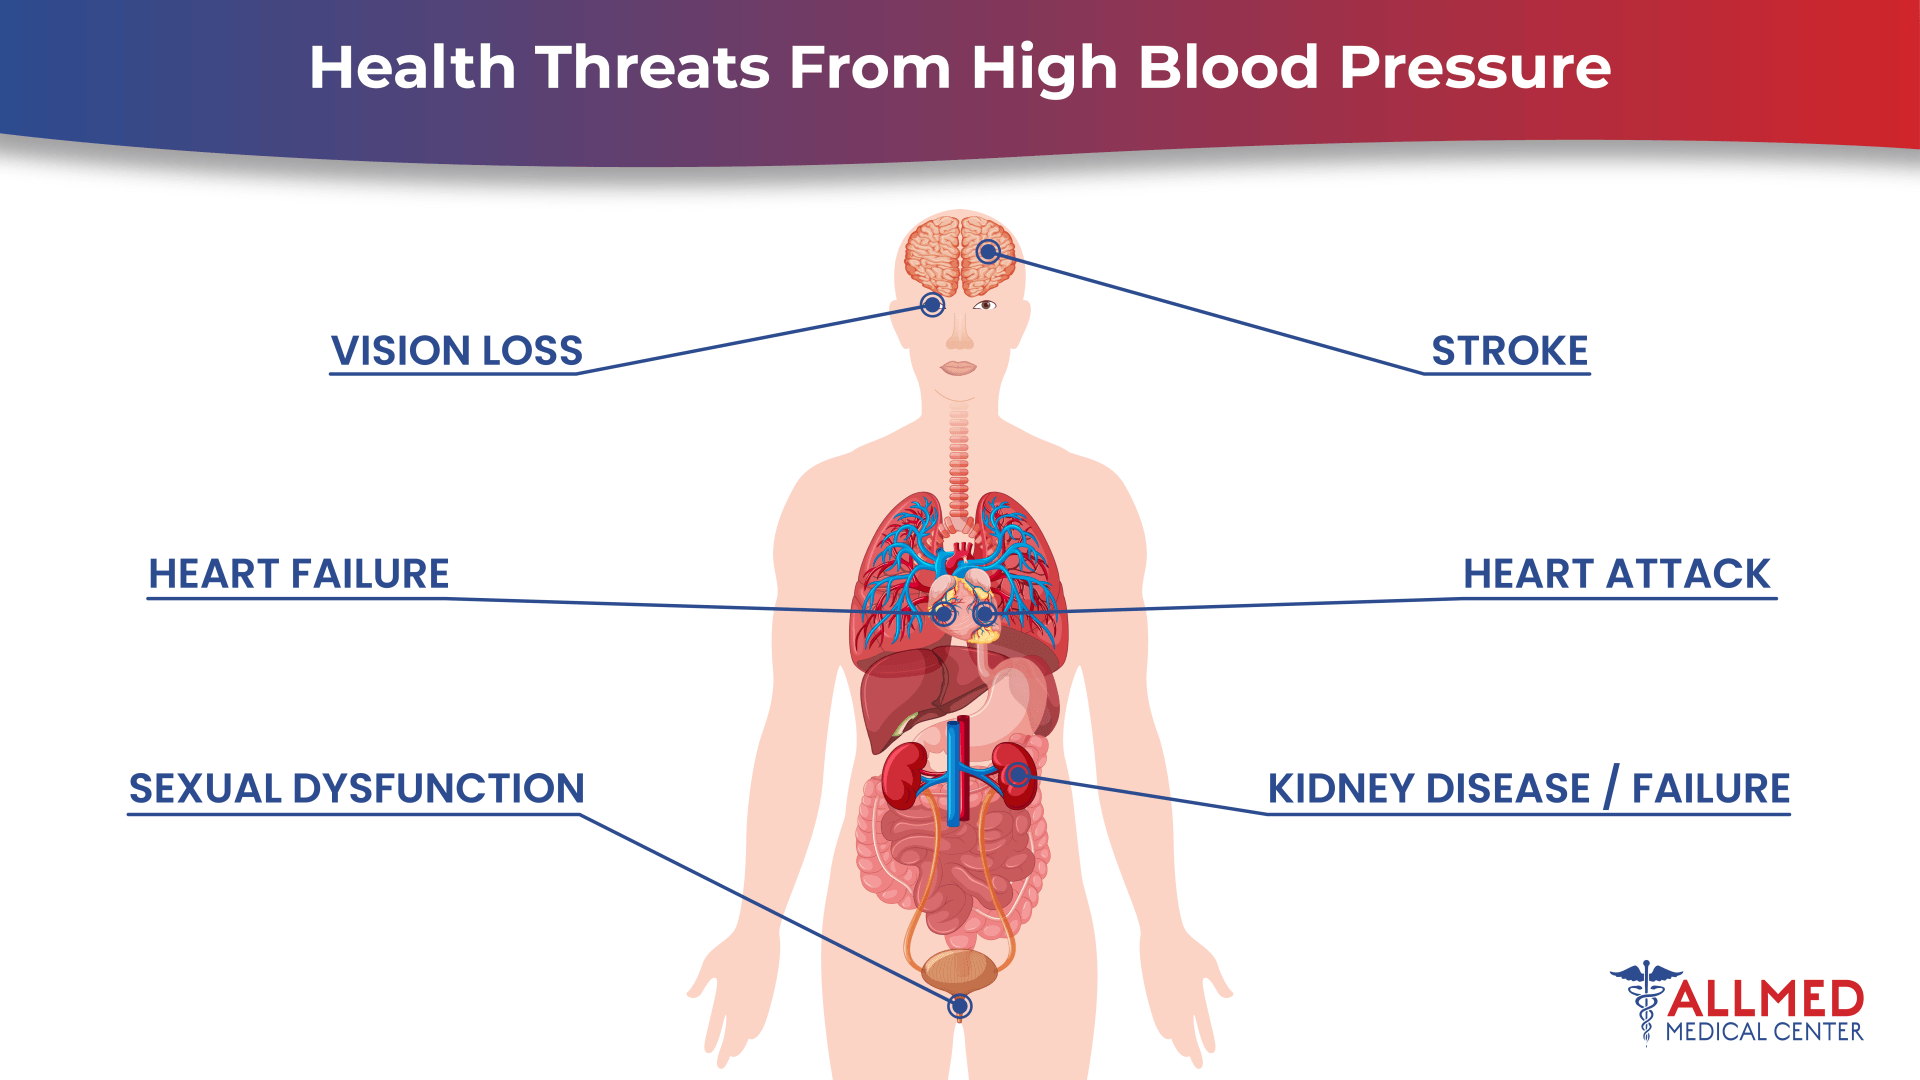 Effects of high blood pressure